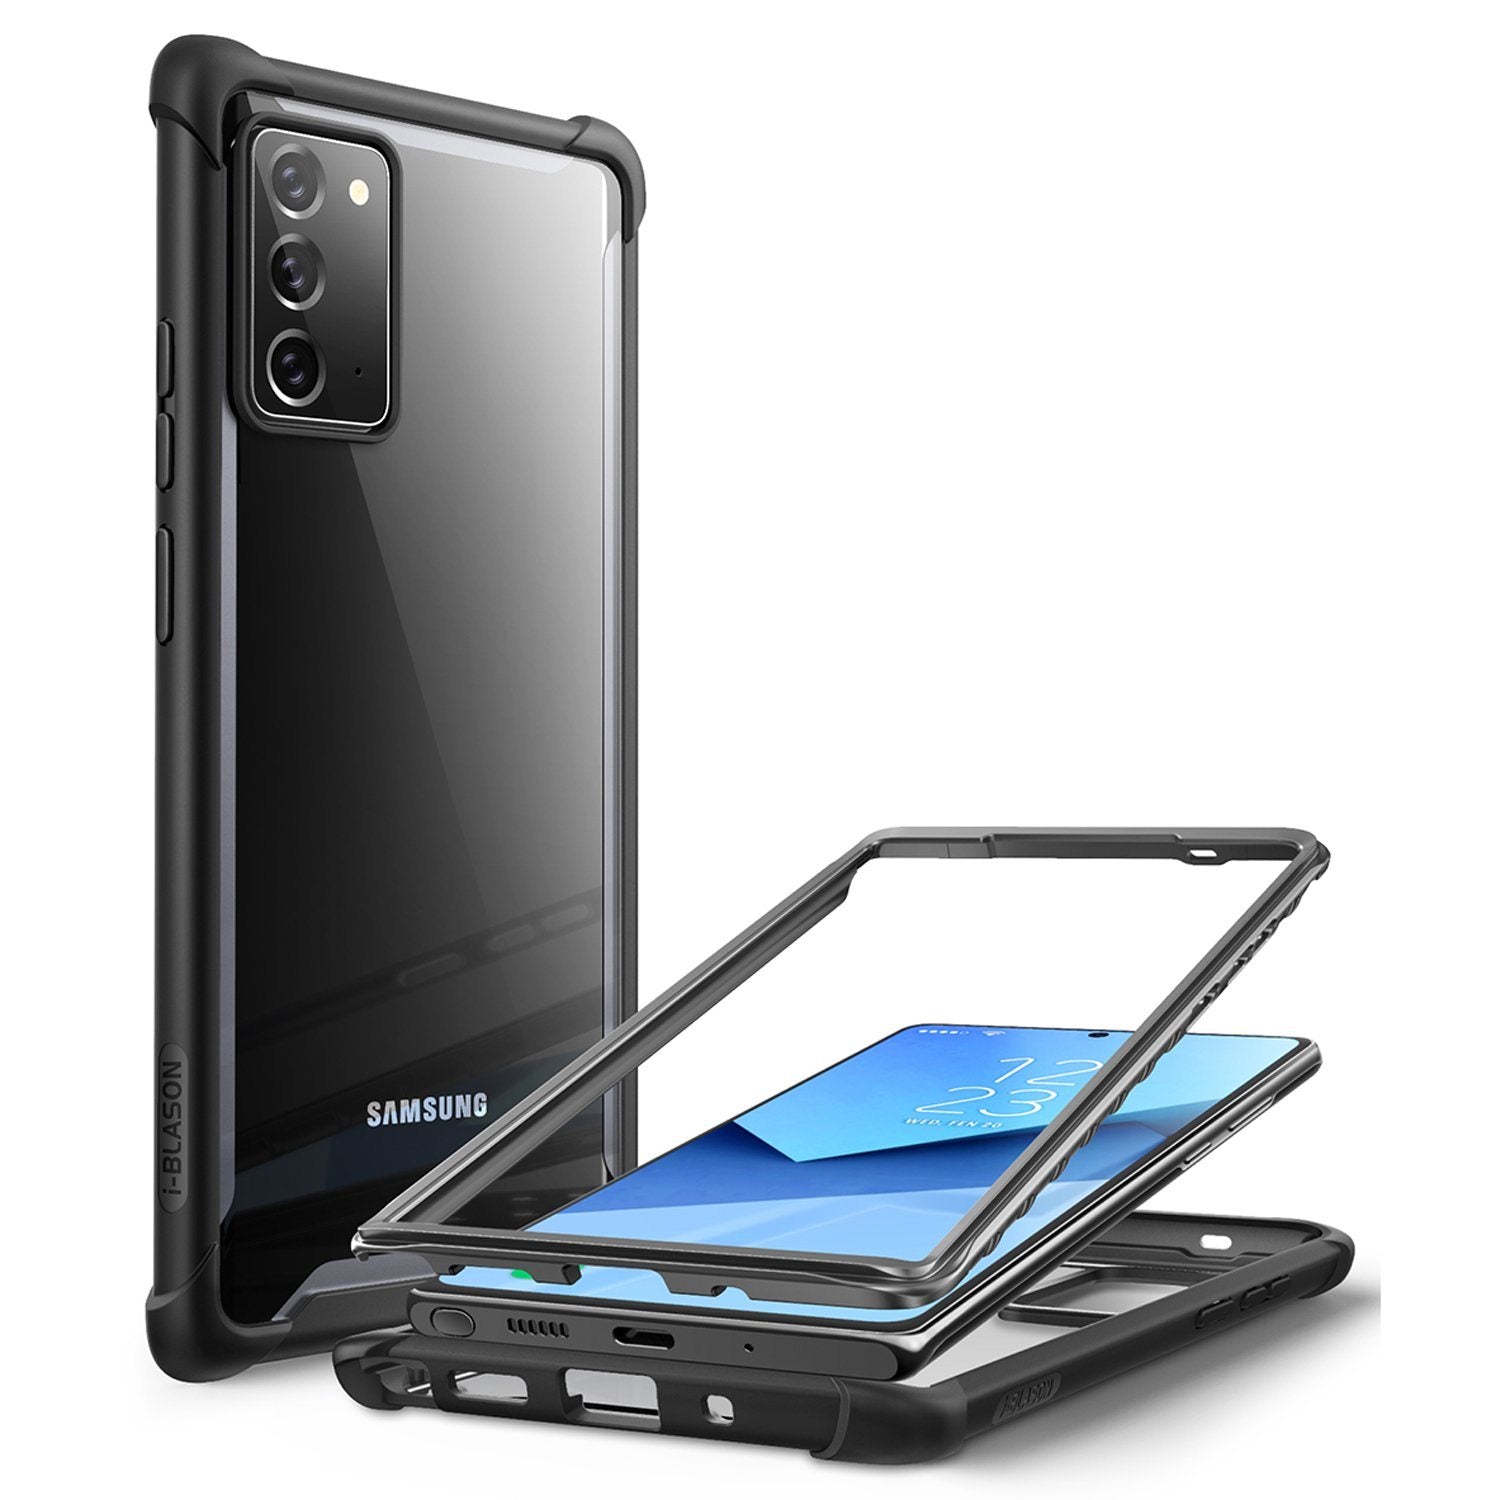 i-Blason Ares Series Clear Case for Samsung Galaxy Note 20(Without Screen Protector), Black Default i-Blason 